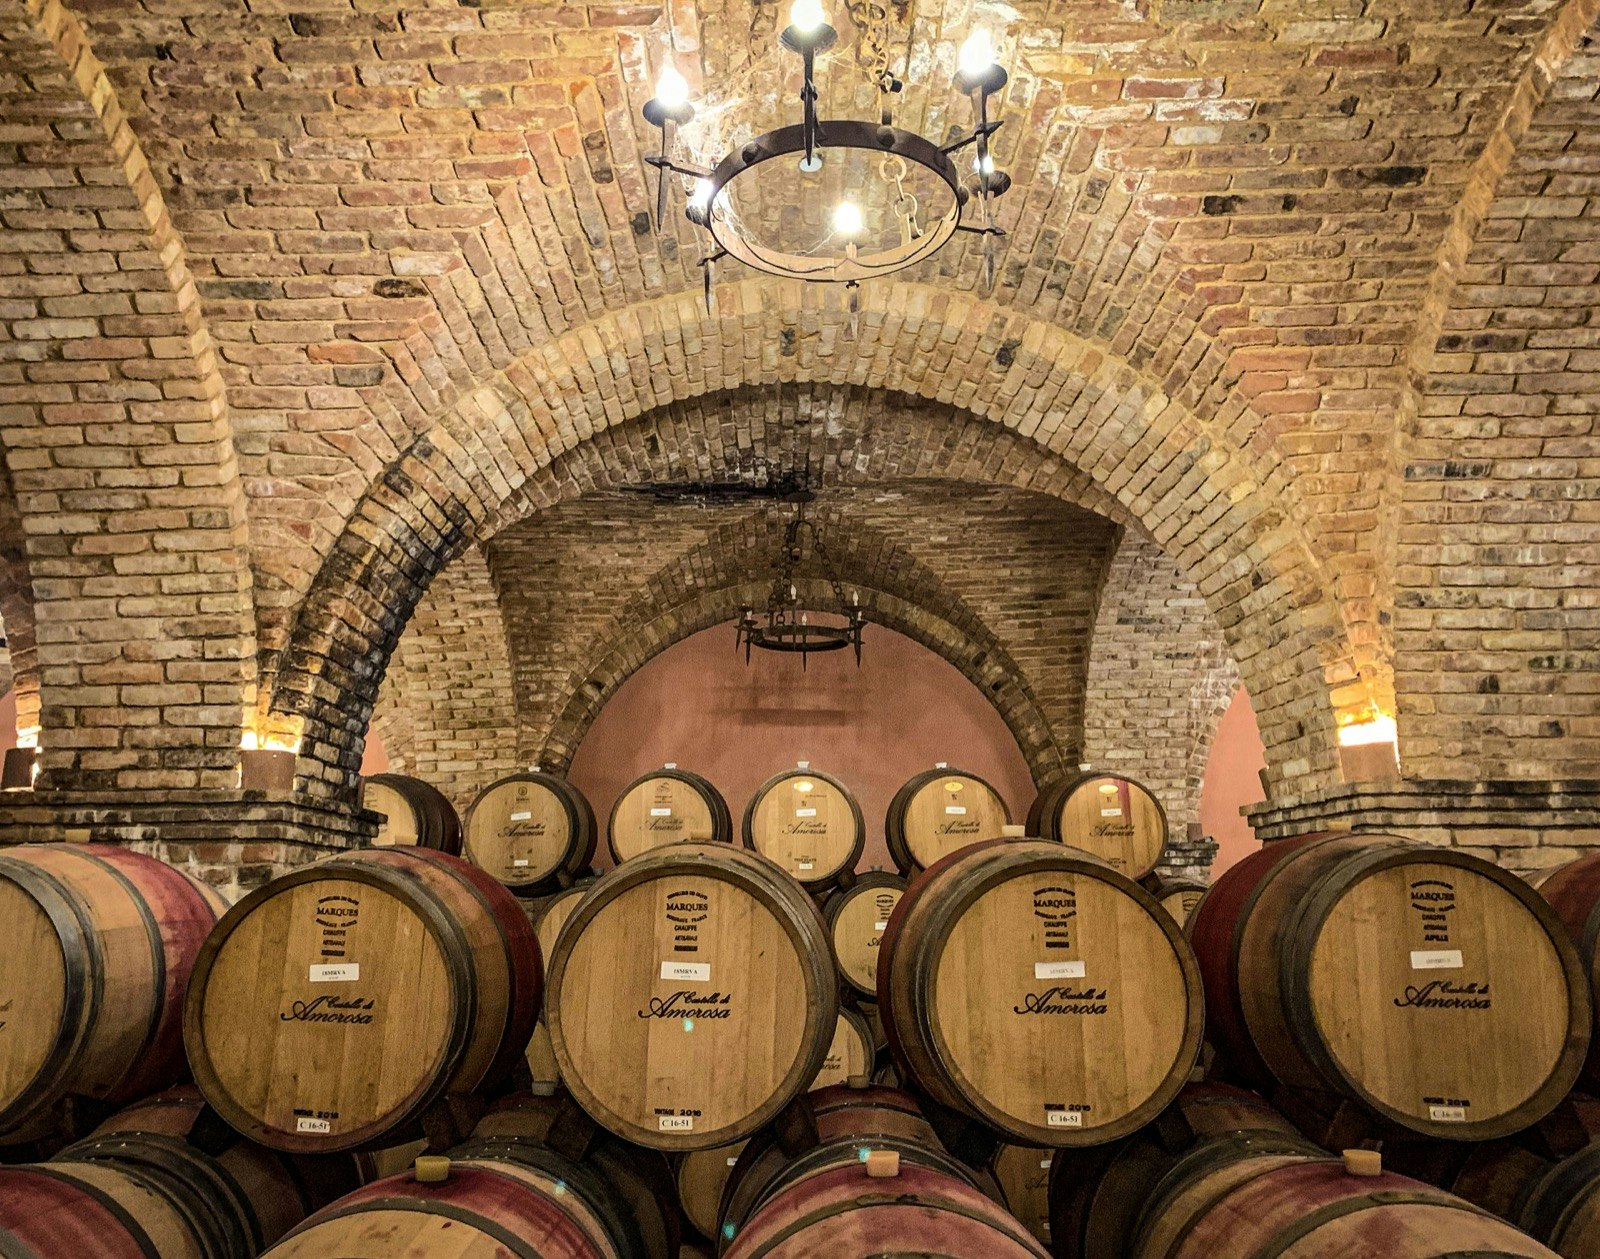 Rows of stacked barrels in a stone cellar, a common way of aging wine in California wine country